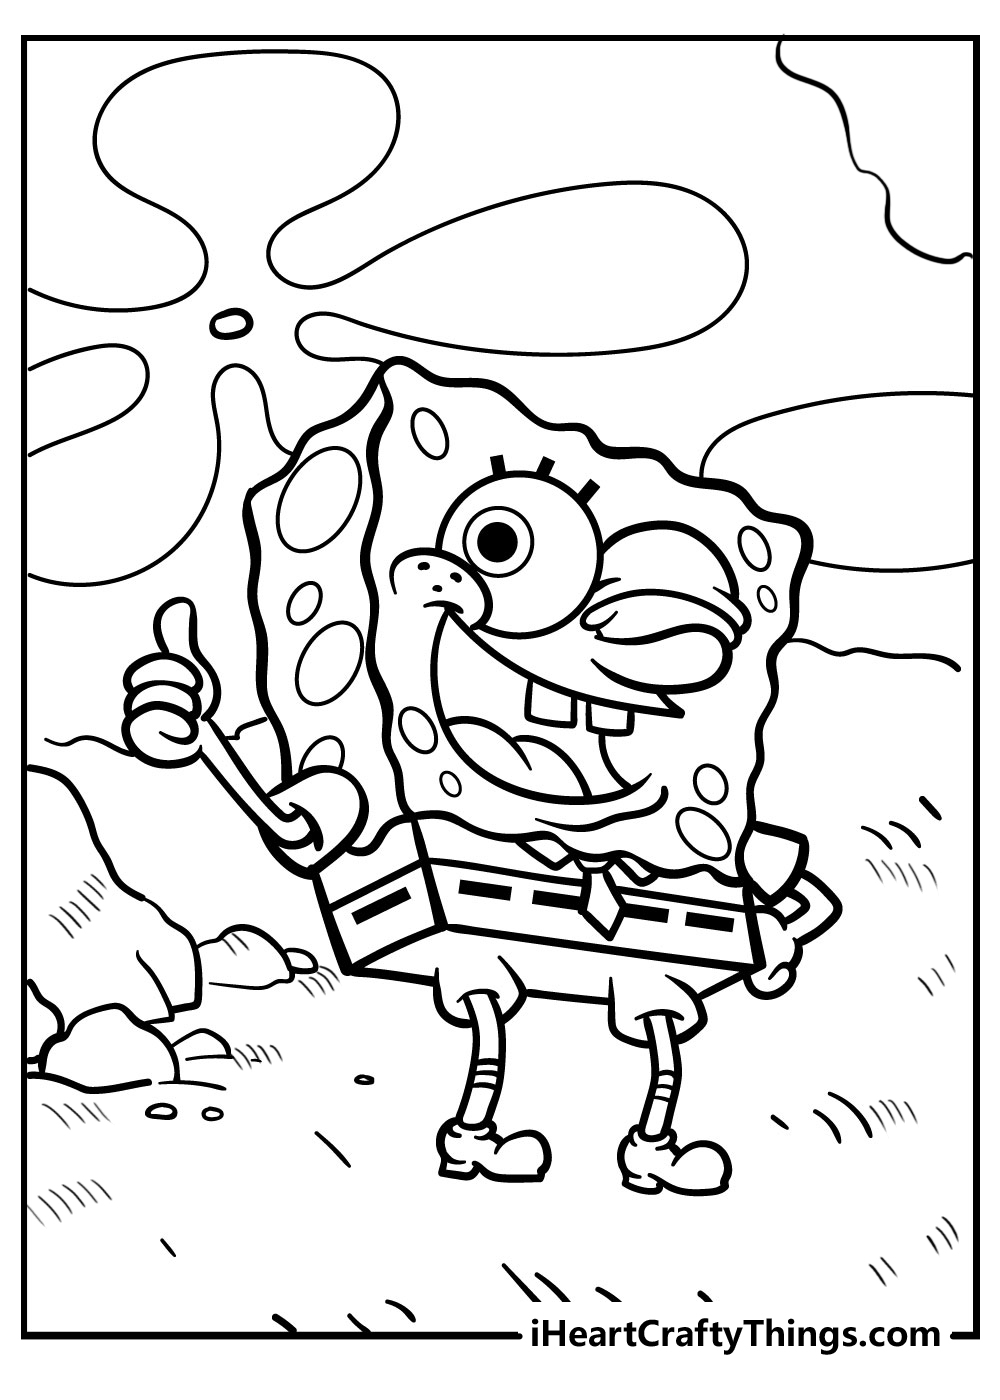 Funny Spongebob Coloring Pages Printables 58